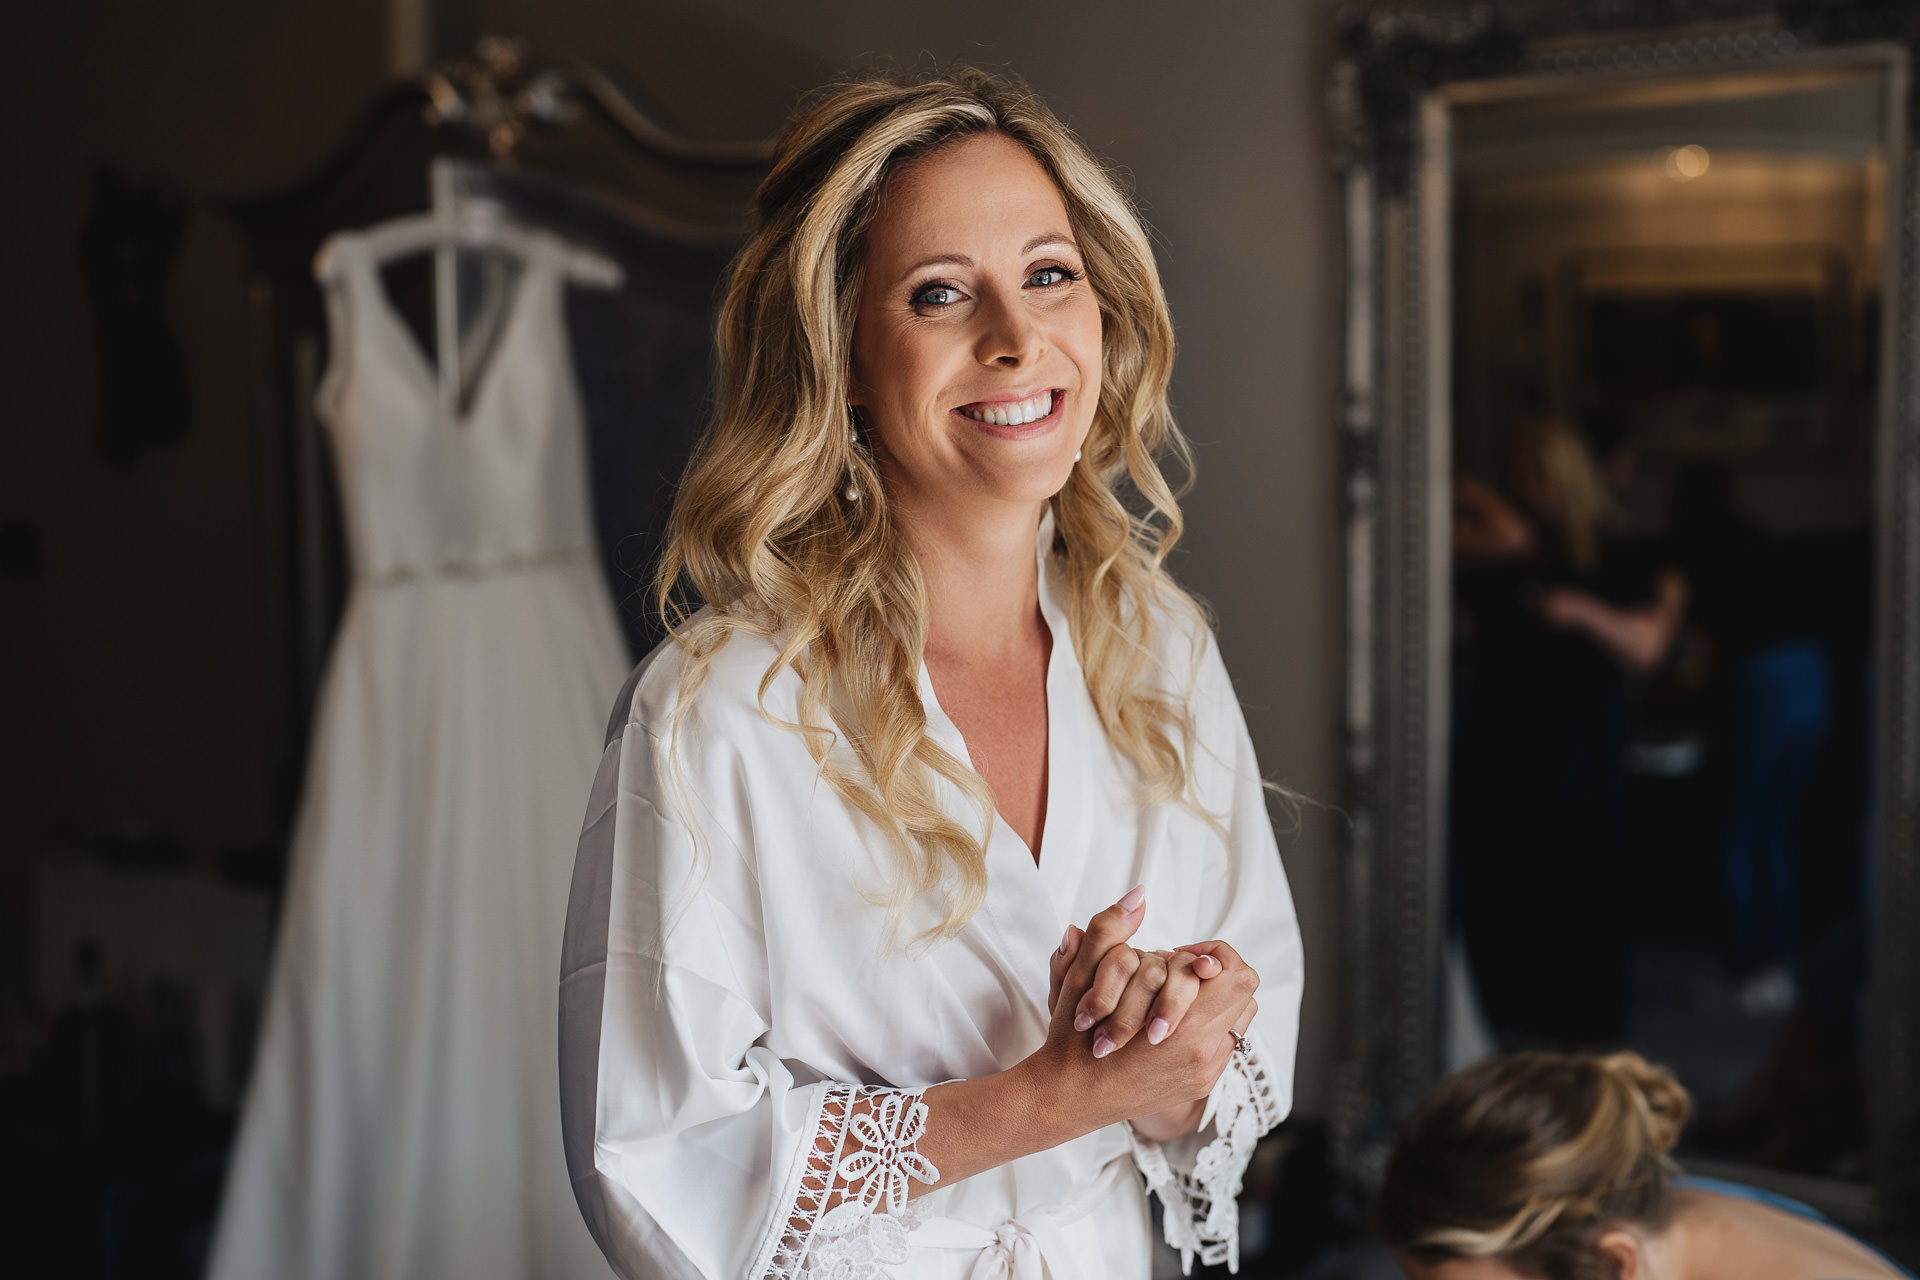 A smiling bride to be, with a wedding dress hanging behind her